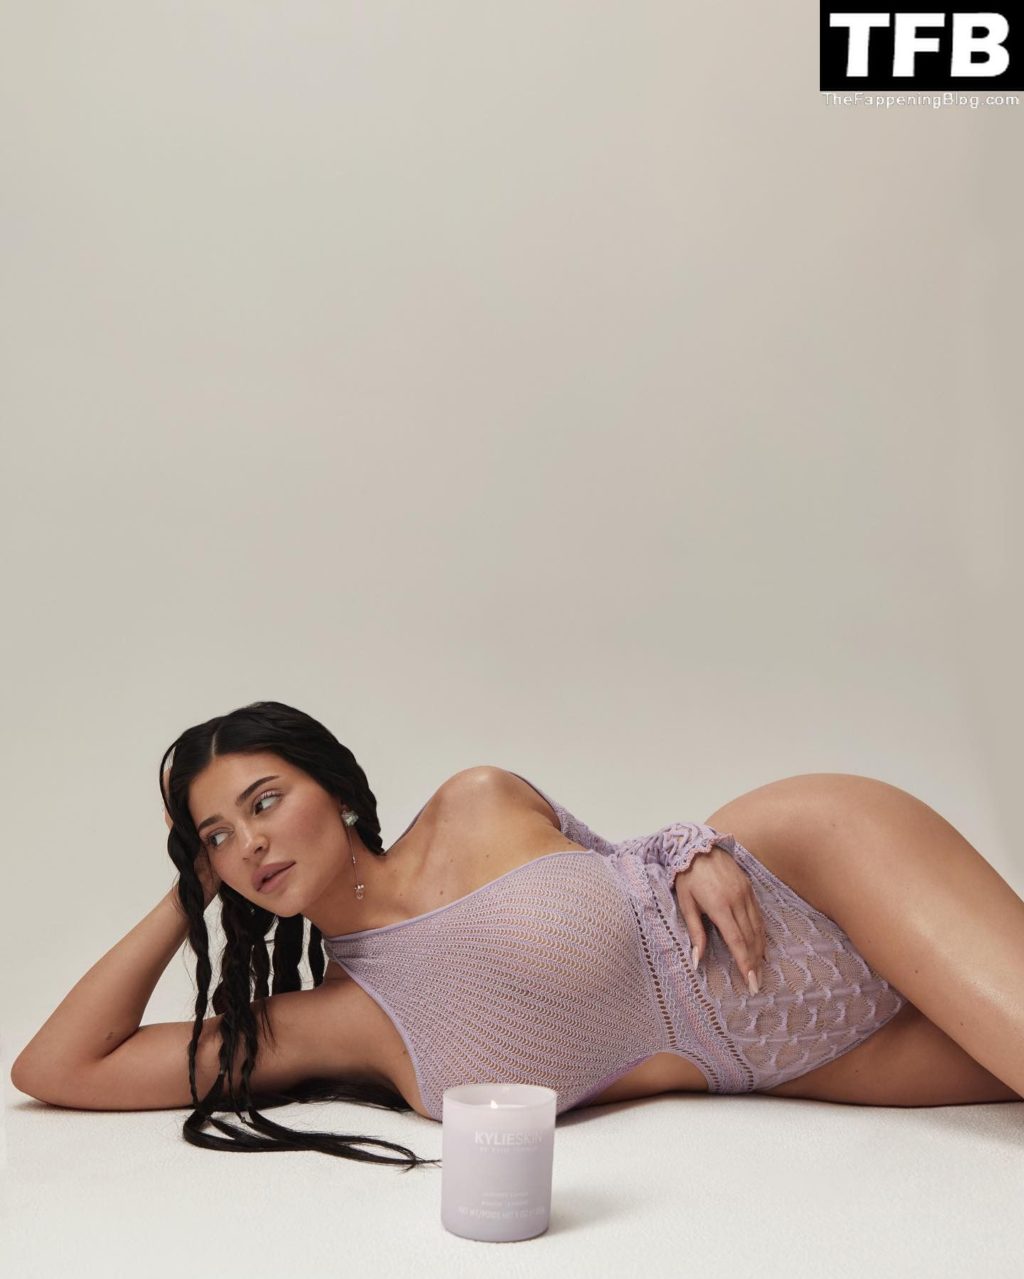 Kylie Jenner Gorgeous Curves 1 thefappeningblog.com  1024x1279 - Kylie Jenner Promotes Her Kylie Skin Collection in a Sexy Shoot (13 Photos)